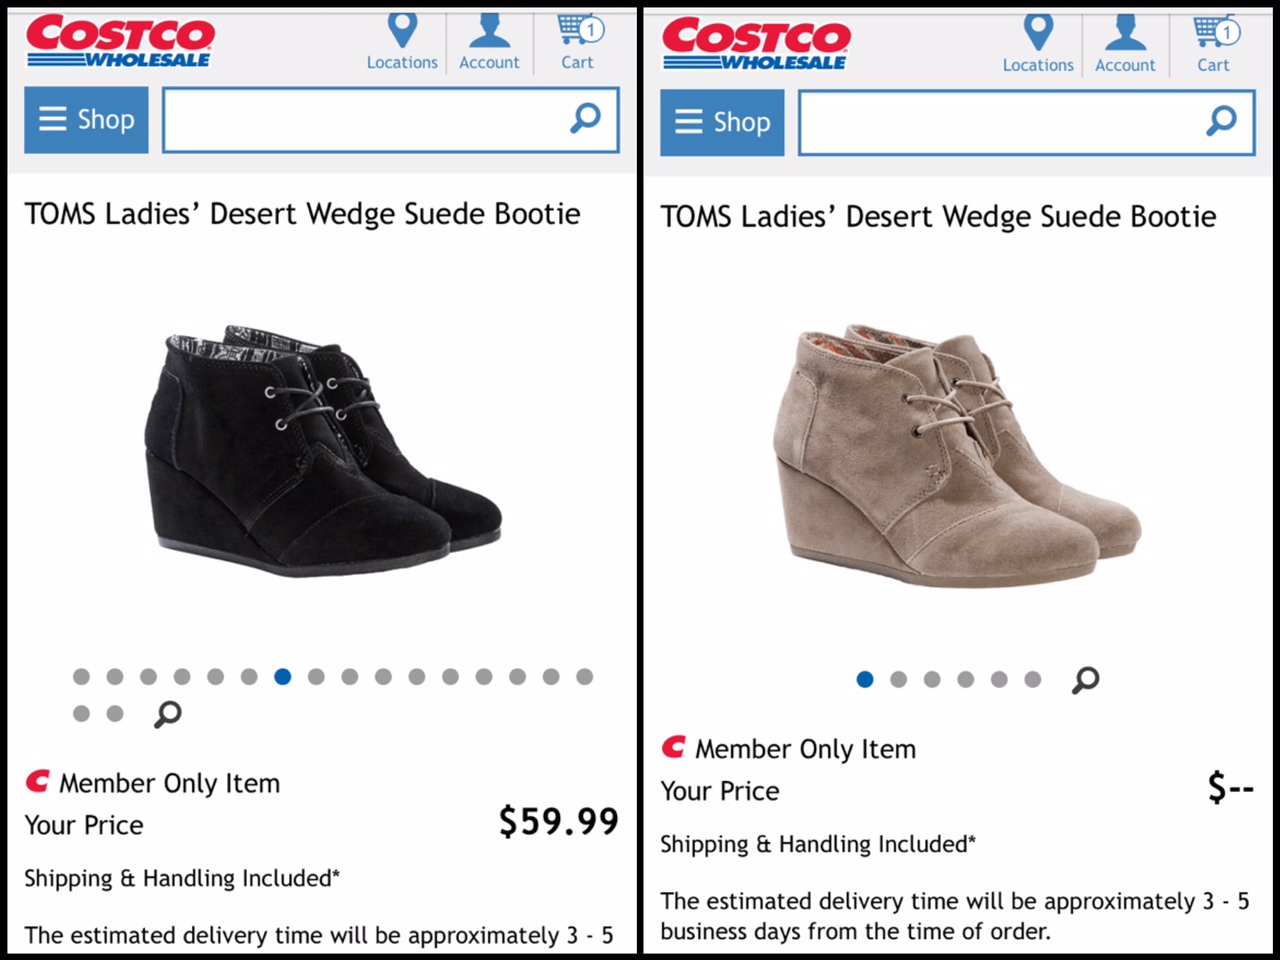 TOMS Desert Wedge booties are just $59.99 for Costco members!